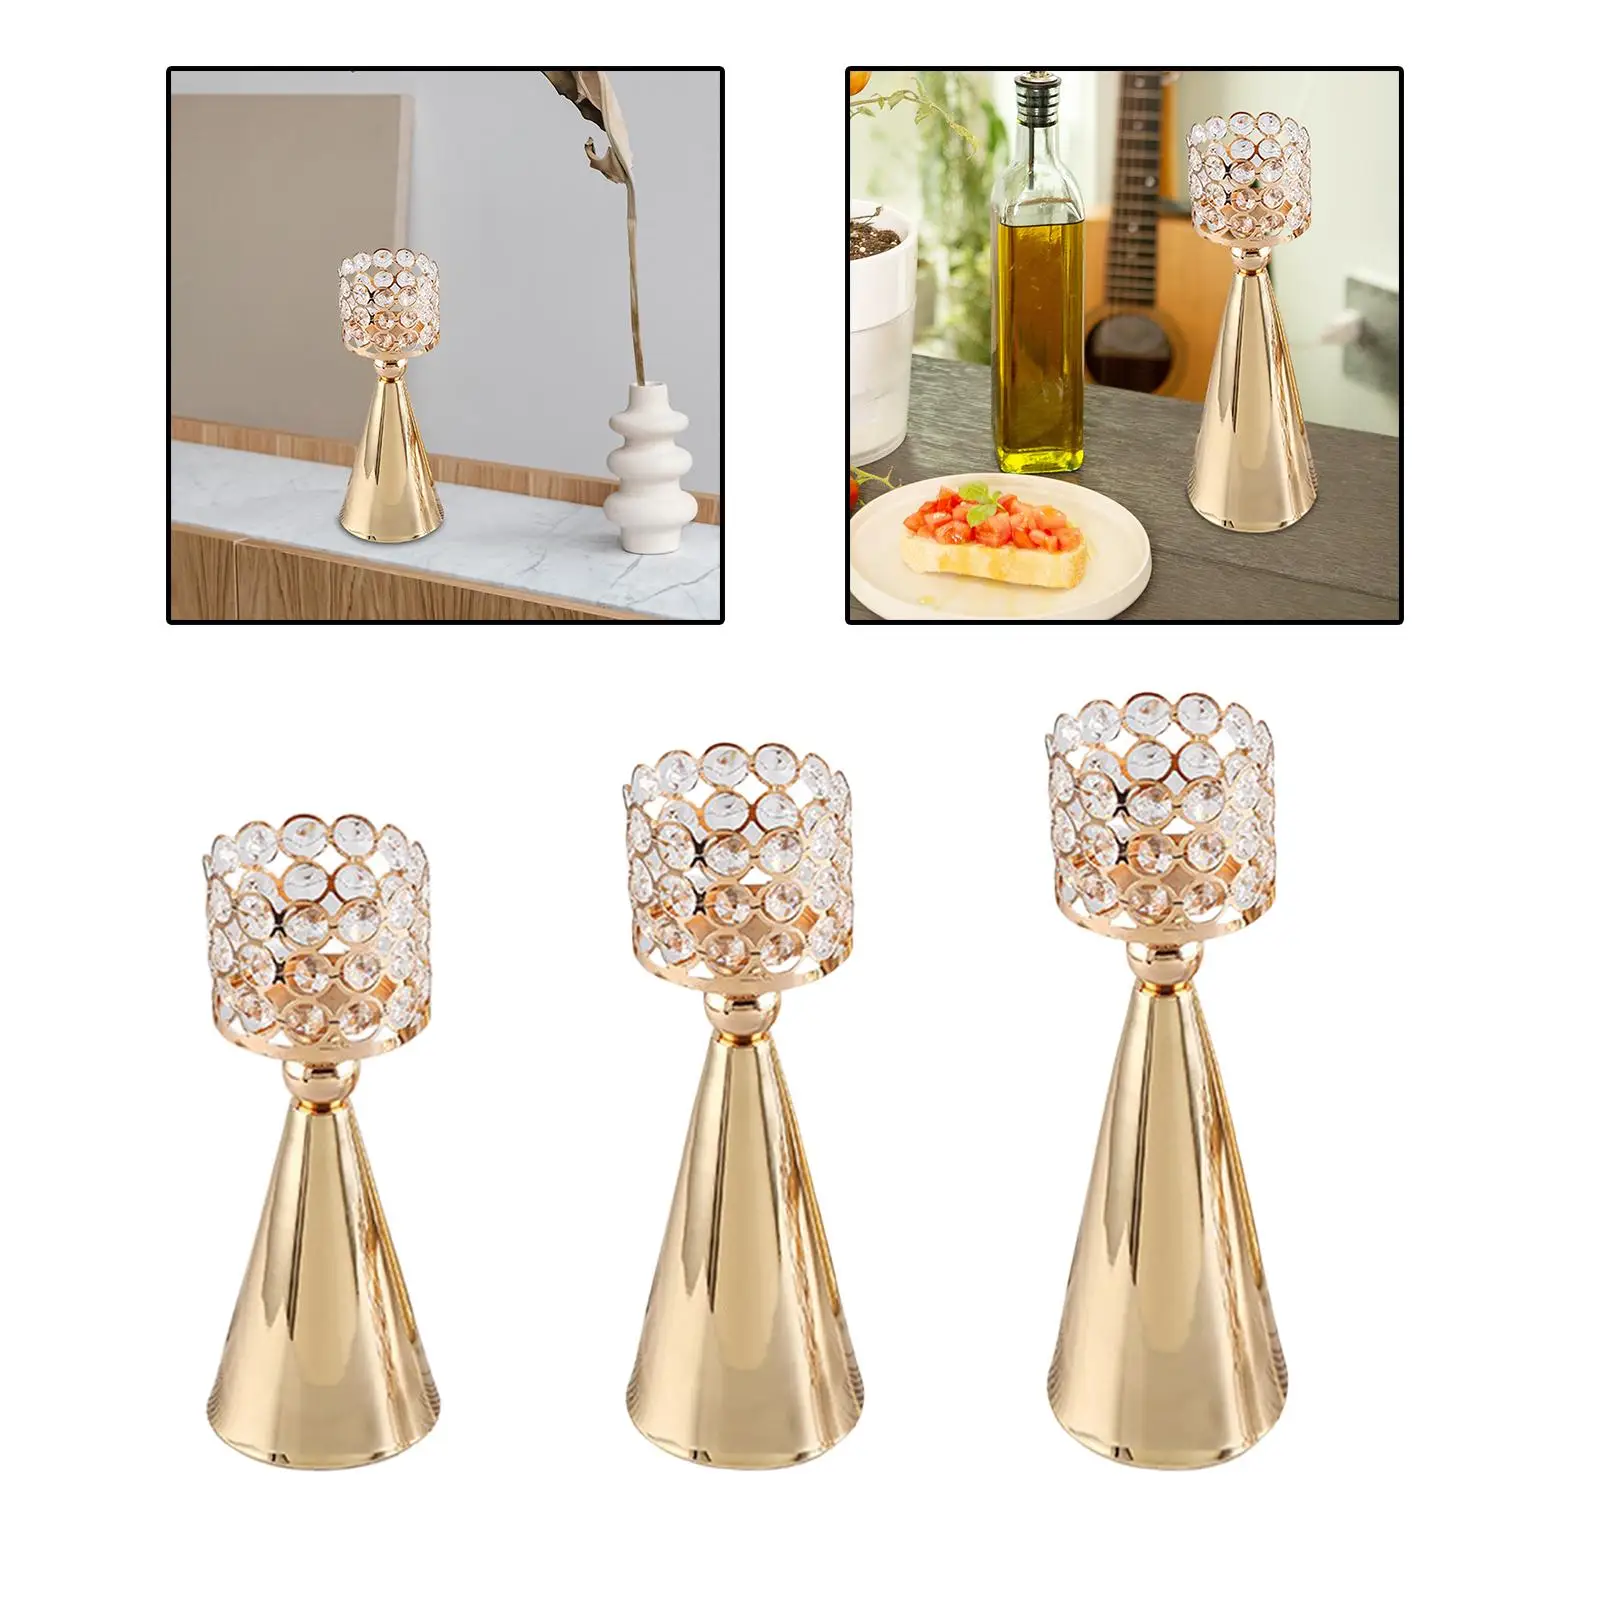 Candle Holder Luxury Centerpieces Decoractive Pillar Candlestick Holders for Living Room Party Home Decoration Halloween Tables